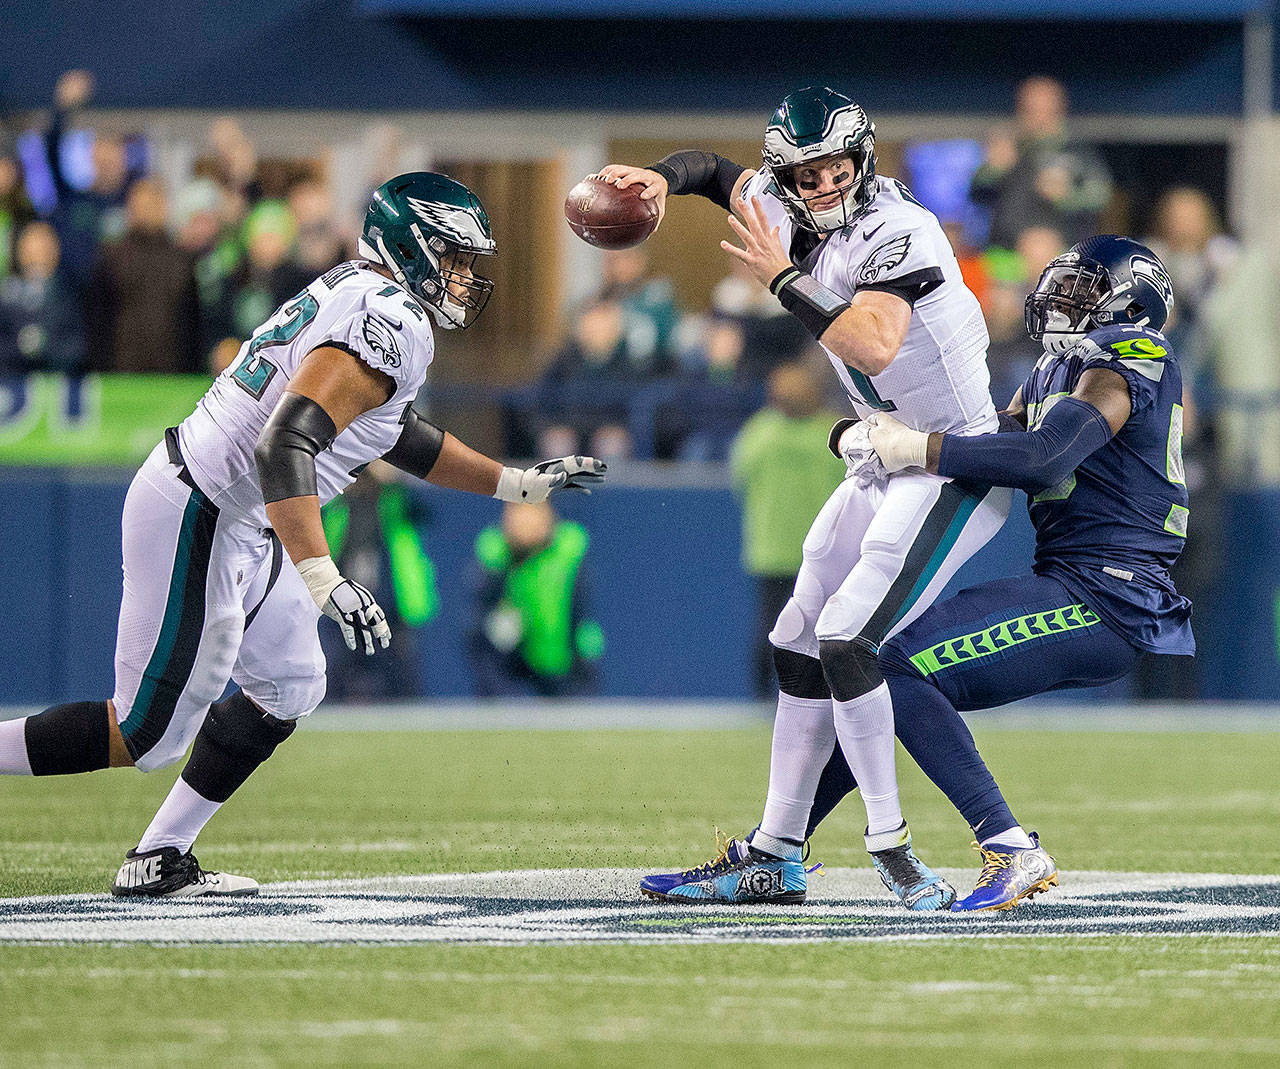 Seattle Seahawks defensive end Frank Clark brings down Philadelphia Eagles quarterback Carson Wentz during first-quarter action on Sunday at CenturyLink Field in Seattle. (Mike Siegel/Seattle Times)